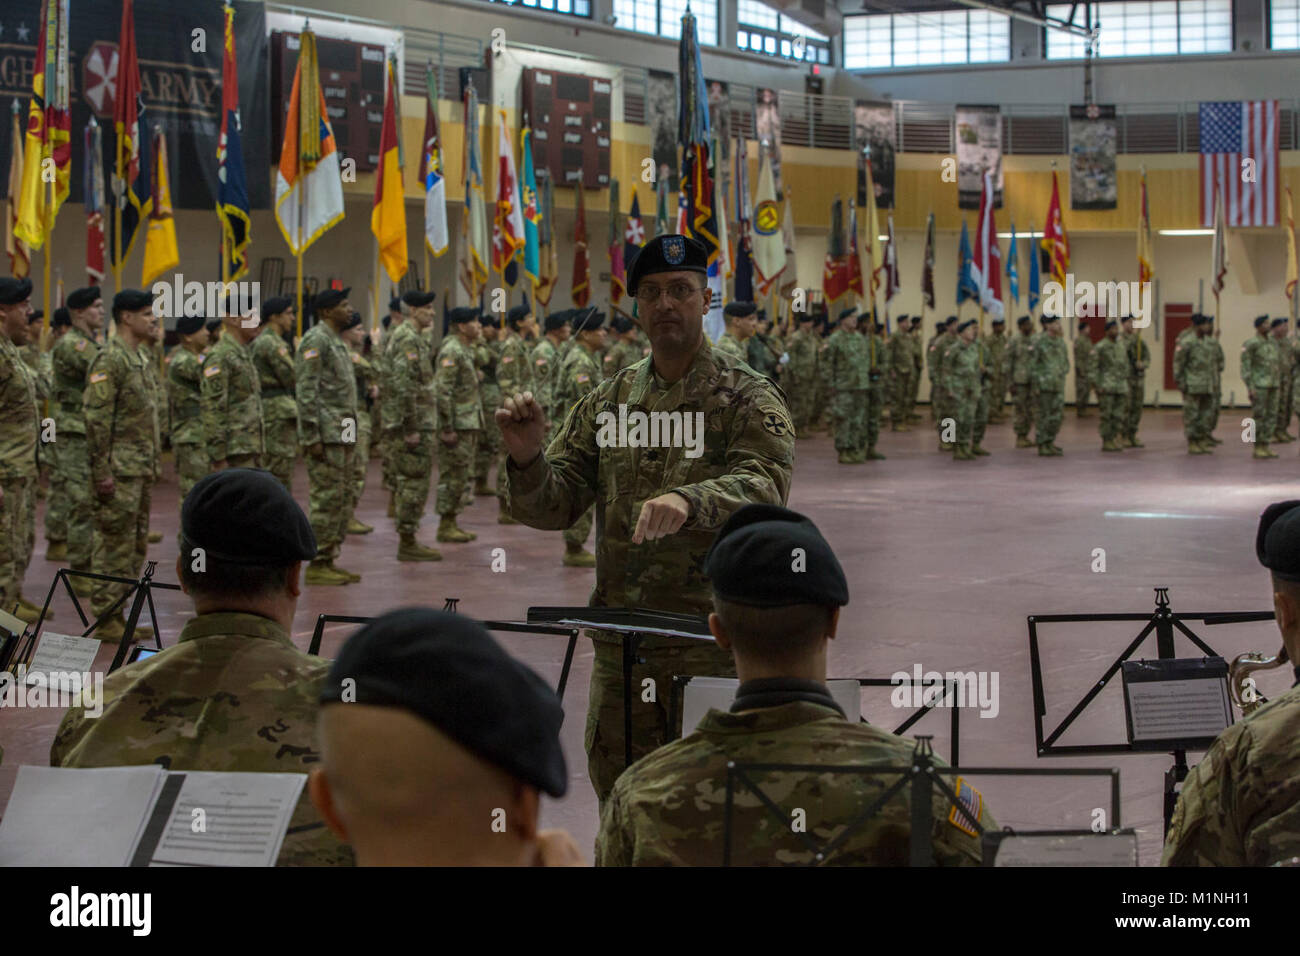 U.S. Army Lt. Col. Treg Ancelet, Eighth Army band conductor, leads the Eighth Army Band through playing of the Eighth Army Song and the Army Song at Camp Humphreys during the Eighth Army change of command ceremony in South Korea, Jan. 5, 2018. Lt. Gen. Thomas S. Vandal relinquished command to Lt. Gen. Michael A. Bills as the new commanding general of Eighth Army. (U.S. Army Stock Photo